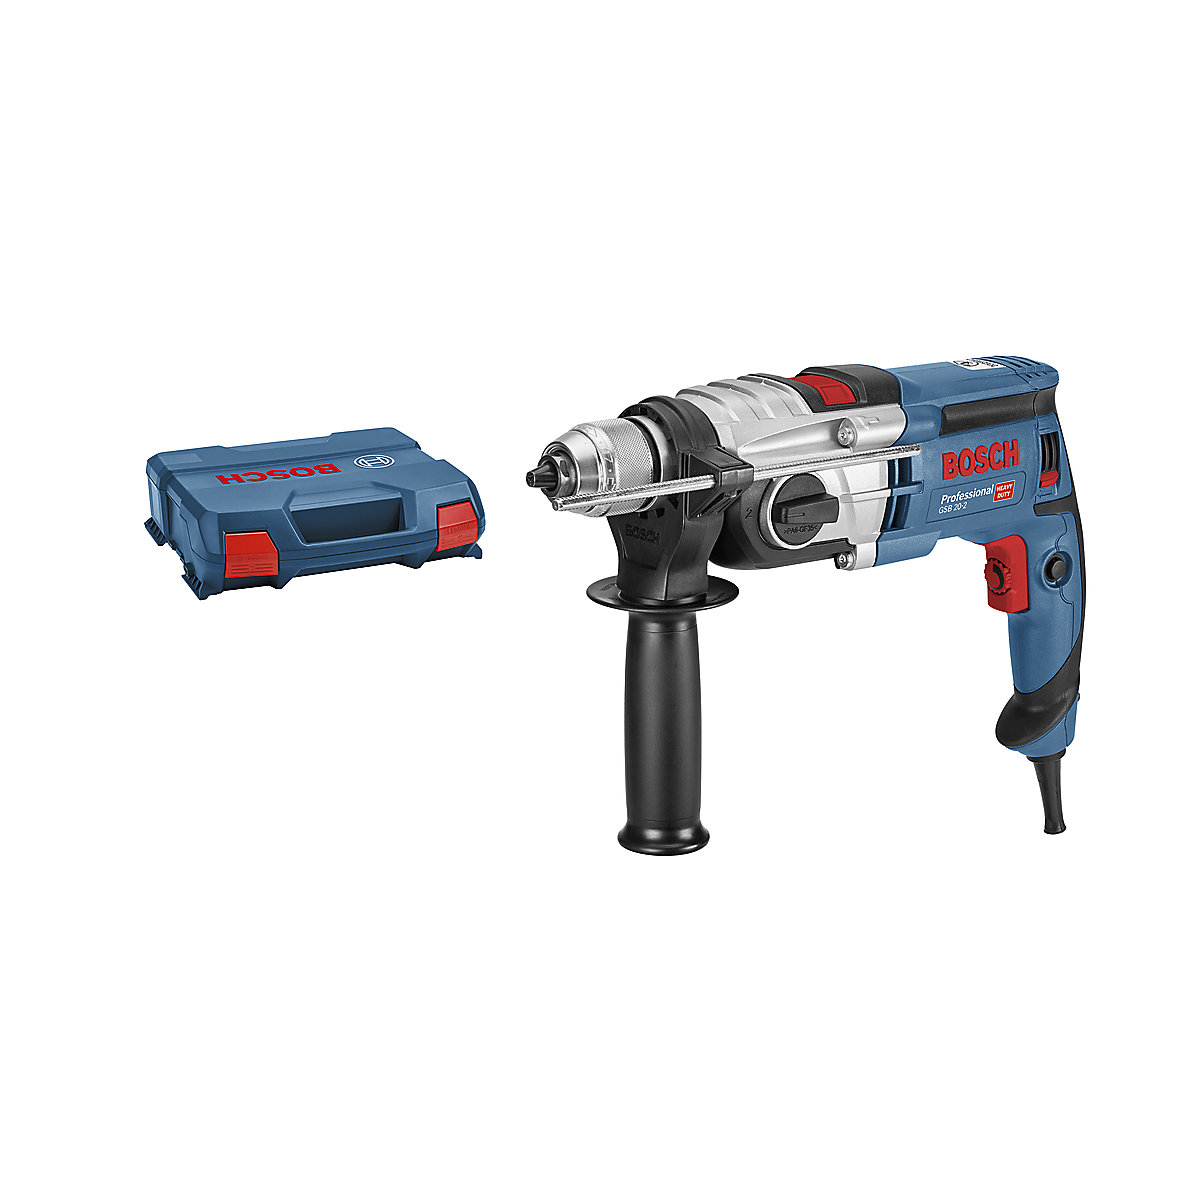 Klopboormachine GSB 20-2 Professional – Bosch (Productafbeelding 3)-2